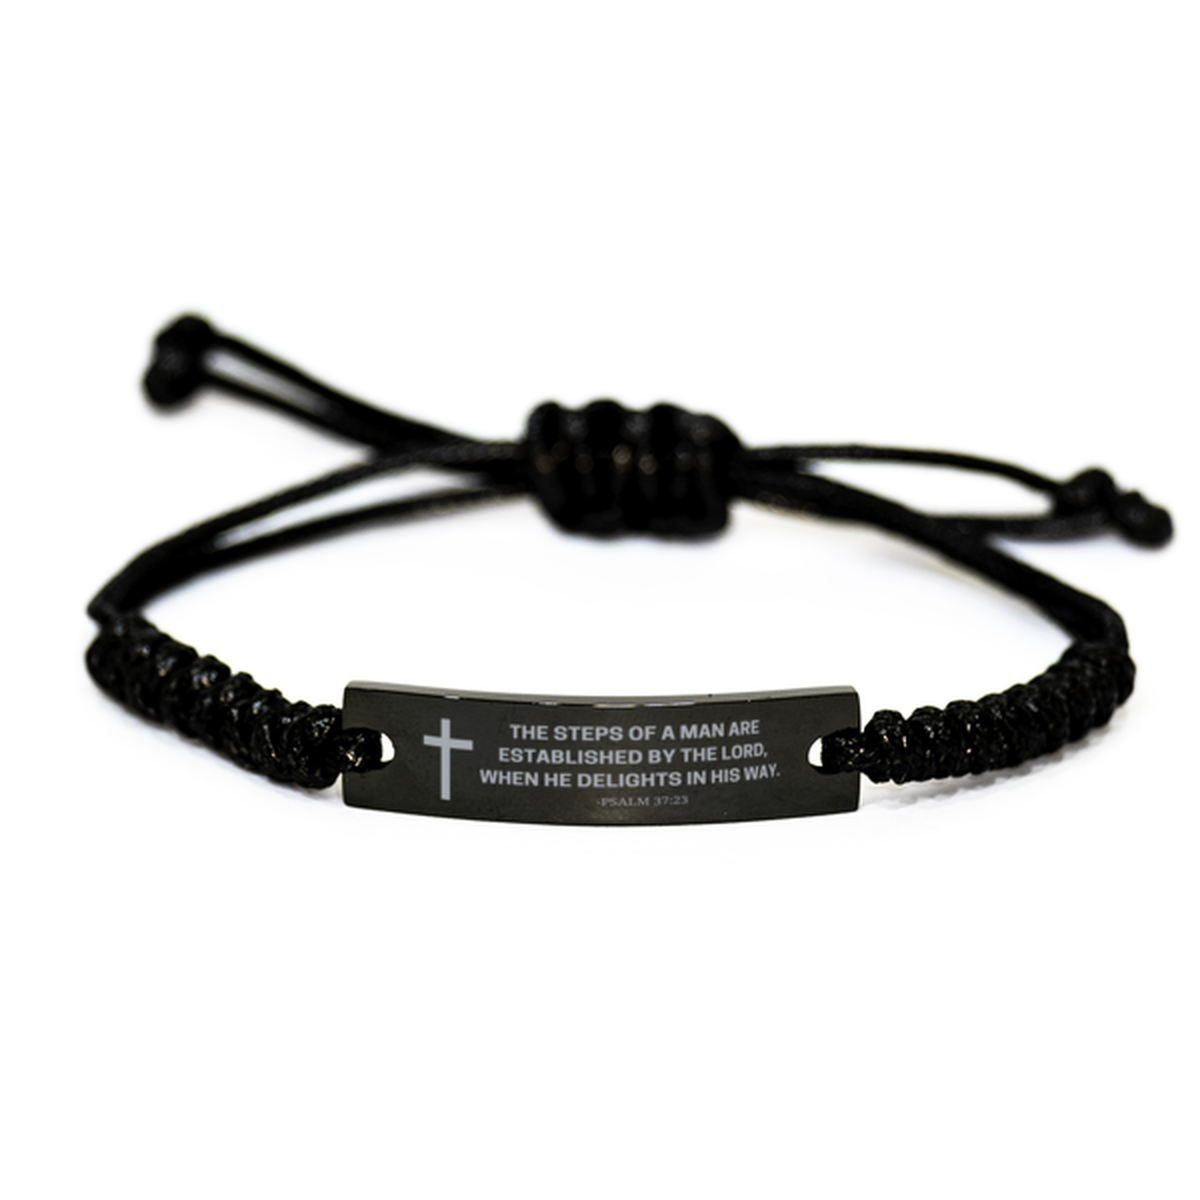 Baptism Gifts For Teenage Boys Girls, Christian Bible Verse Black Rope Bracelet, The steps of a man are, Catholic Confirmation Gifts for Son, Godson, Grandson, Nephew